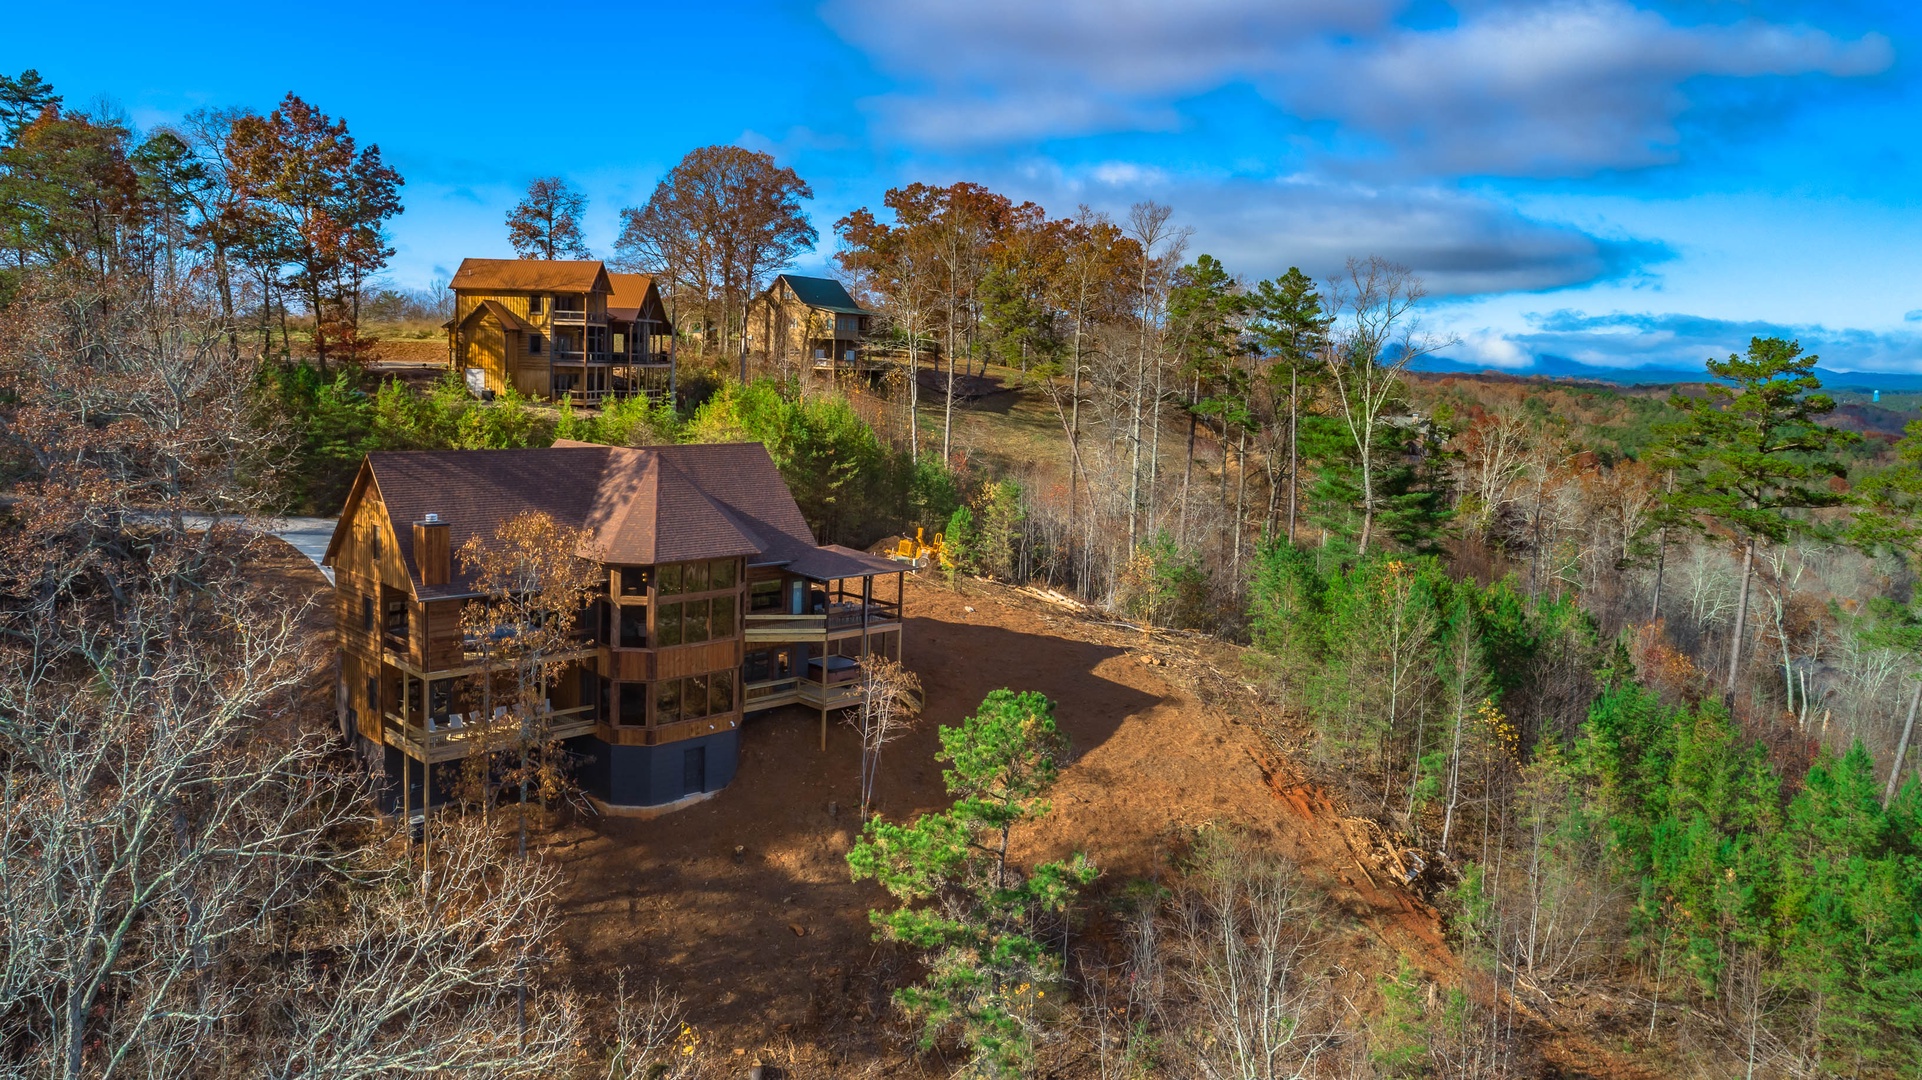 The Ridgeline Retreat - Aerial view of the cabin